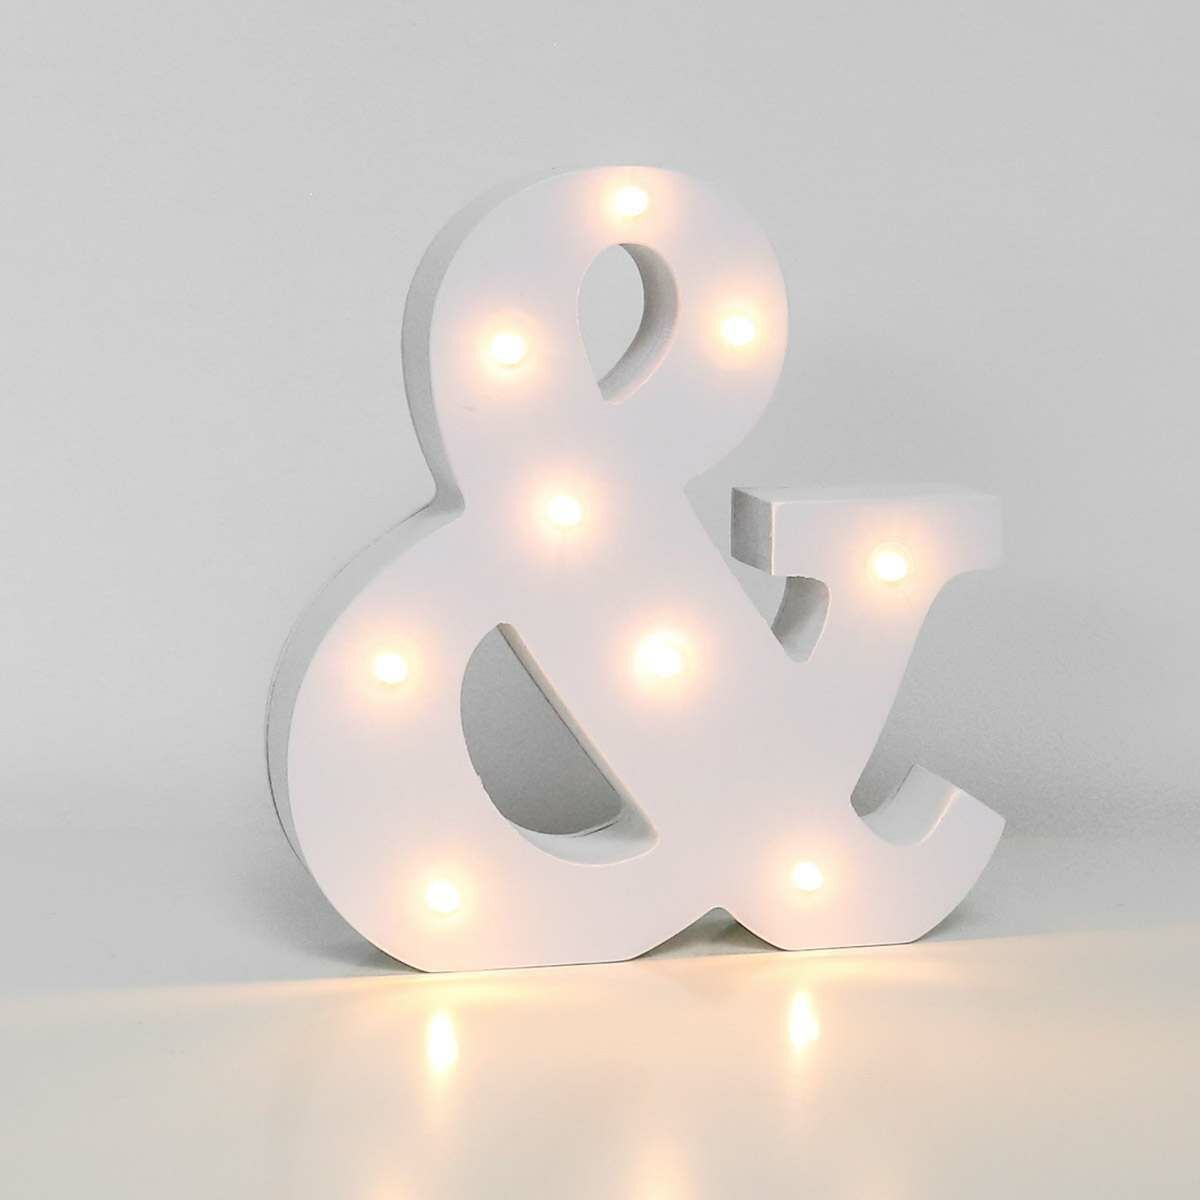 Alphabet '&' Marquee Battery Light Up Circus Letter, Warm White LEDs, 16cm image 3